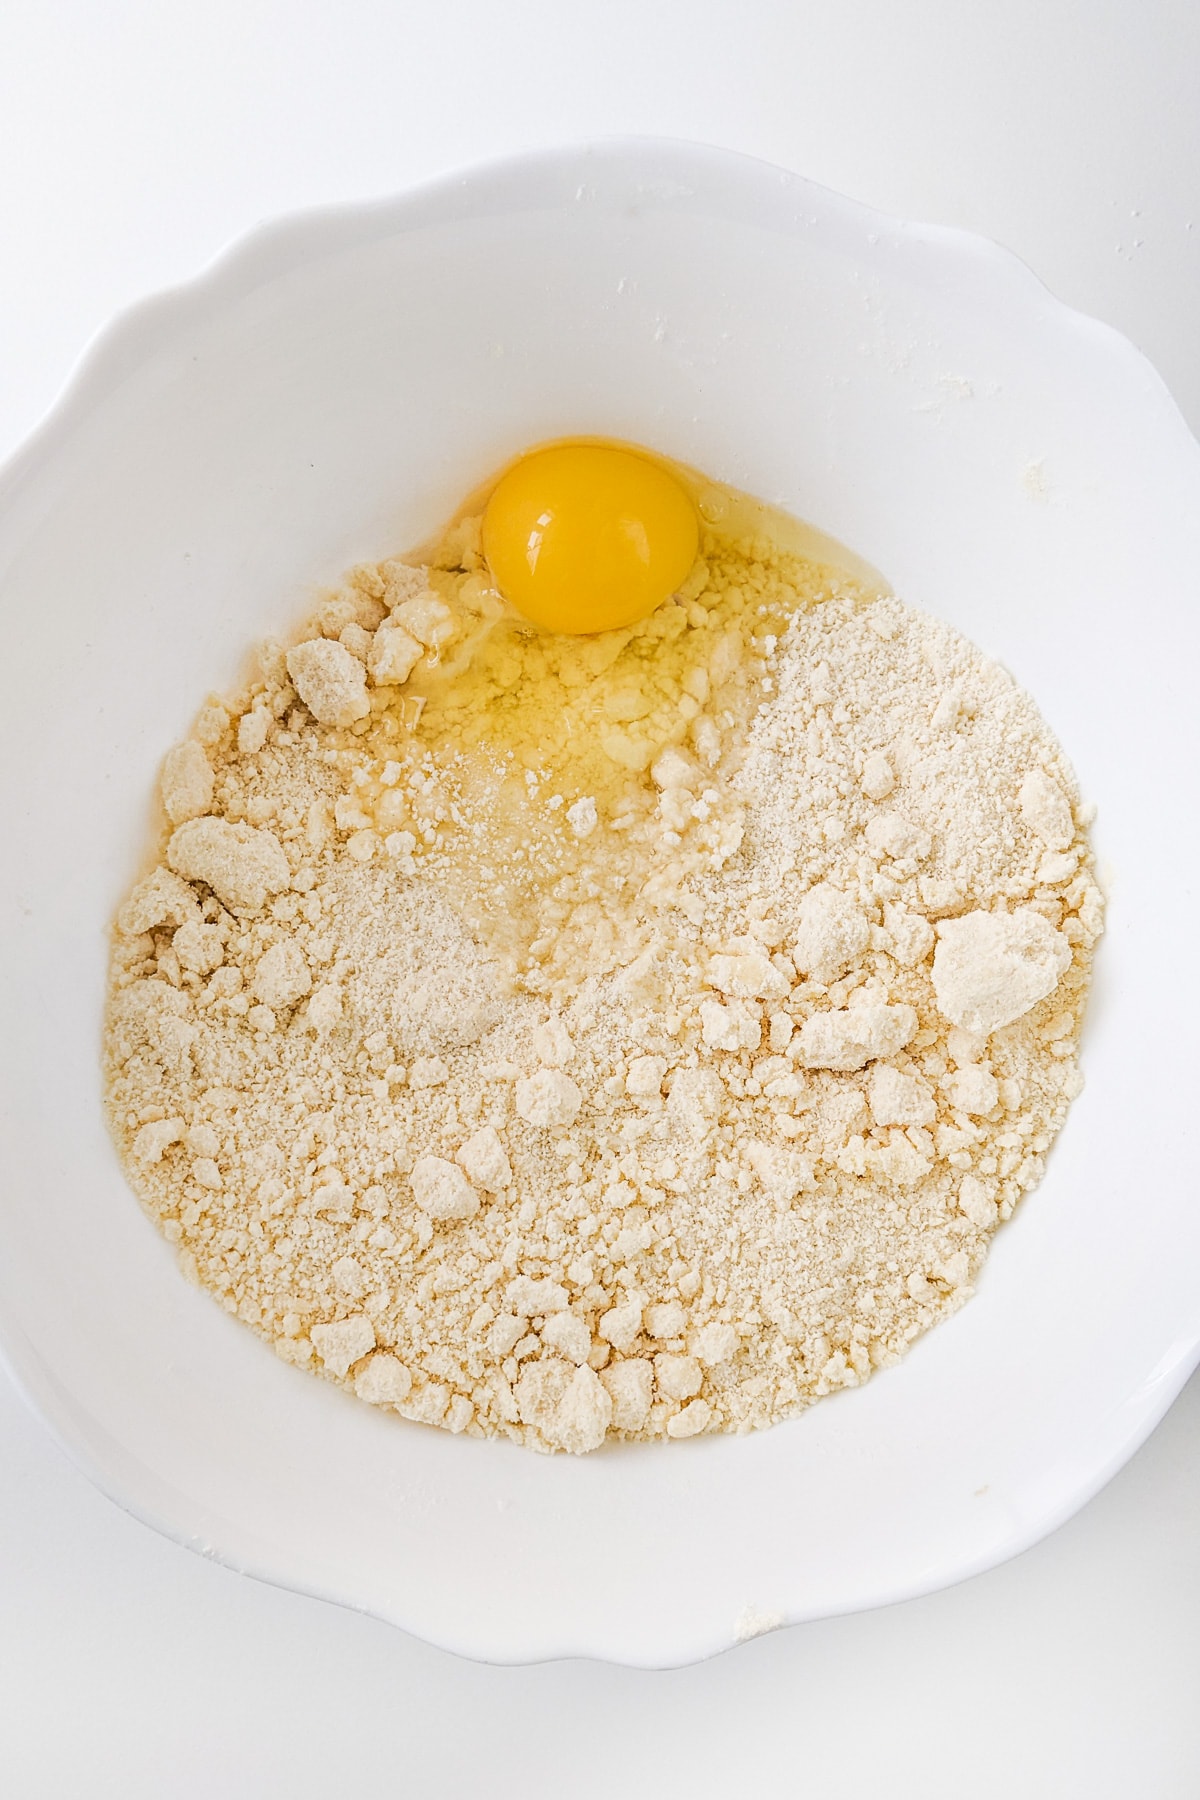 An raw egg over dried sugar cookies dough ingredients.